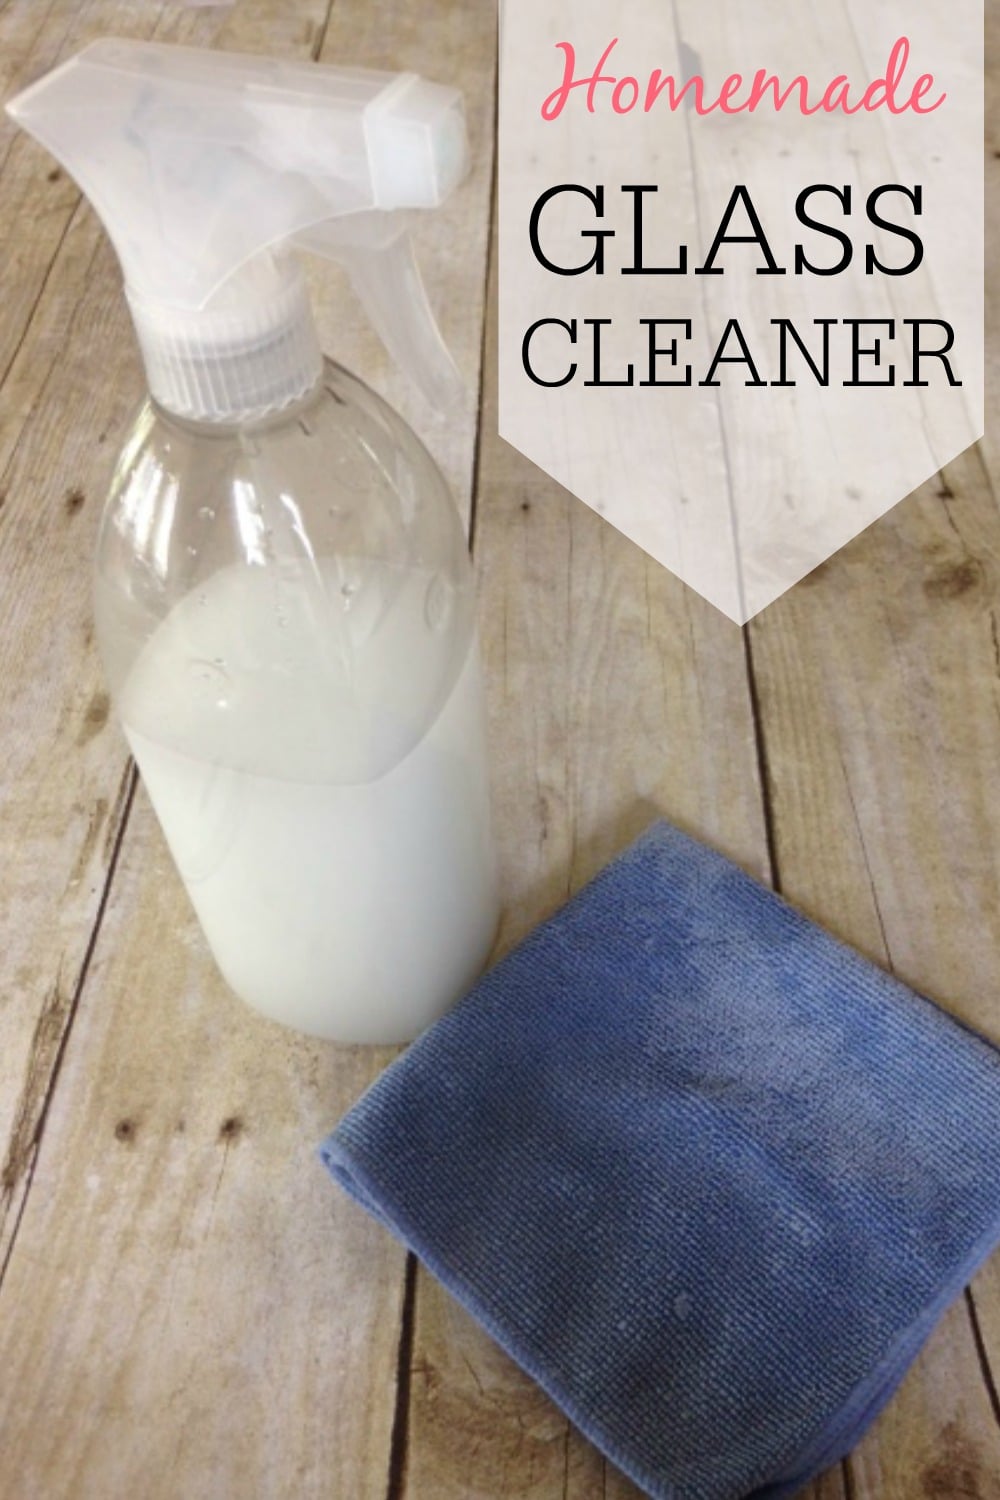 printable cleaning labels frugally blonde